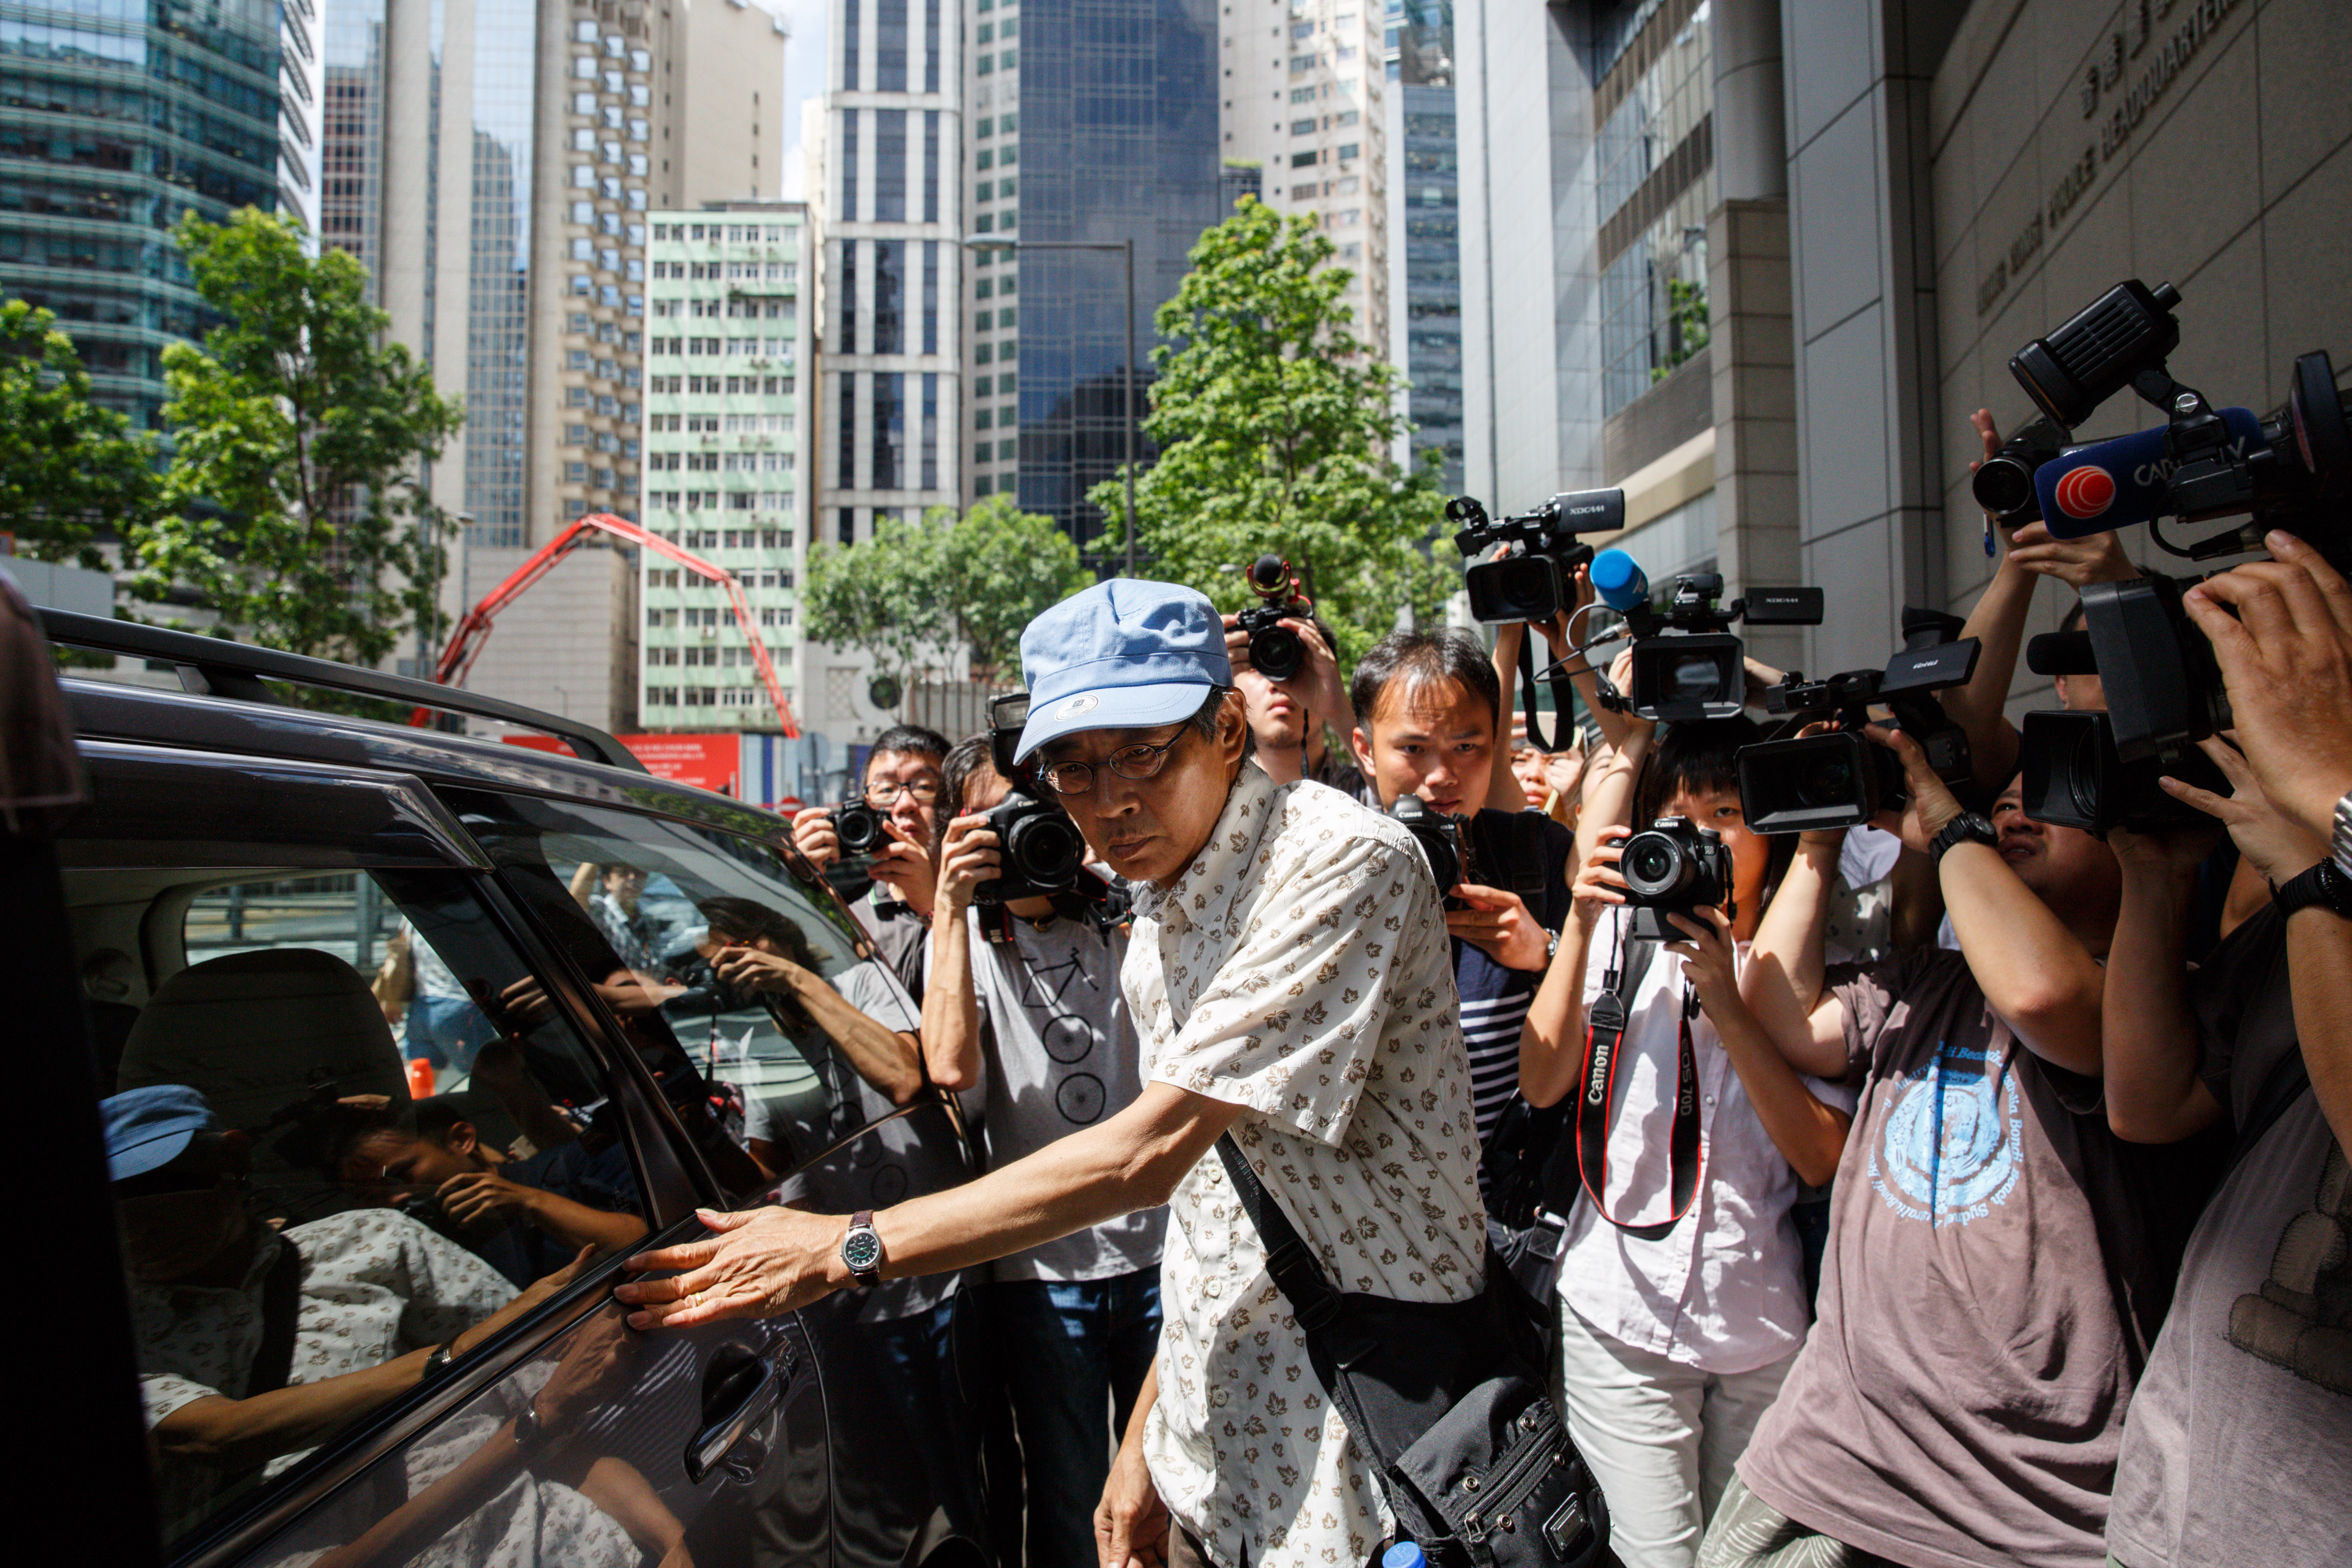 Previously missing Hong Kong bookseller Lam Wing-kee, center, arrives at Wanchai police station to report to the police in Hong Kong on June 27, 2016 (Anthony Wallace—;AFP/Getty Images)